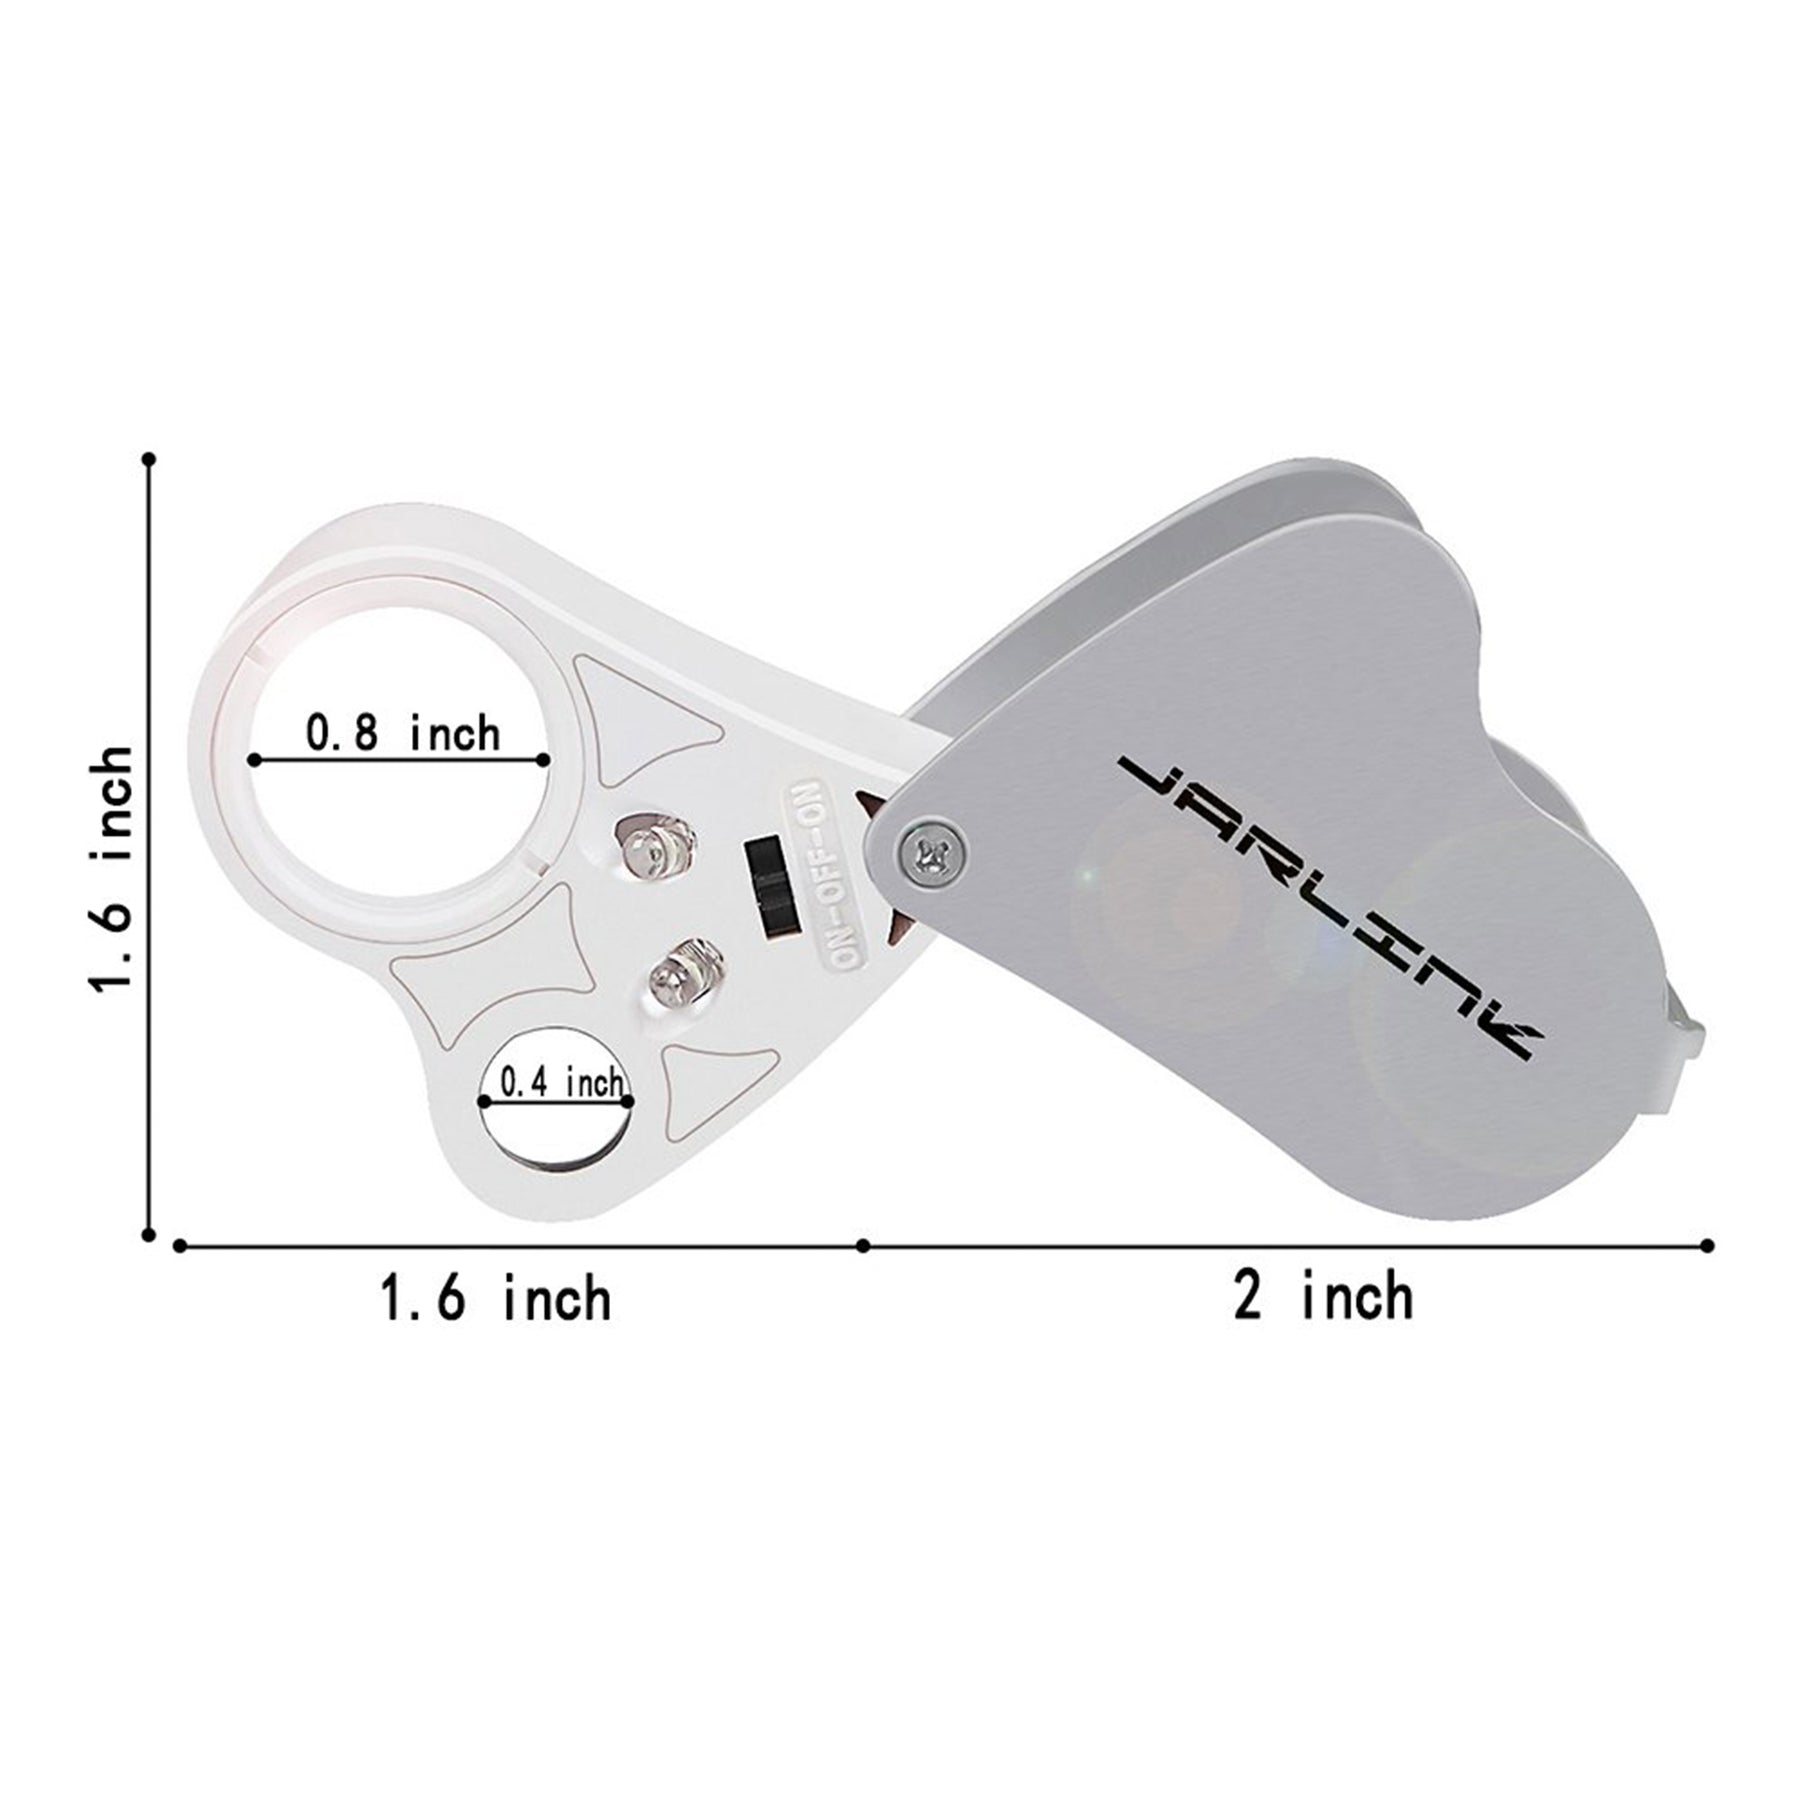 Wholesale Foldable Metal Moonstone Jewelry Magnifier Microscope With 6 LED  + 6 UV Light 10X, 20X, 30X From Pbbands, $13.62